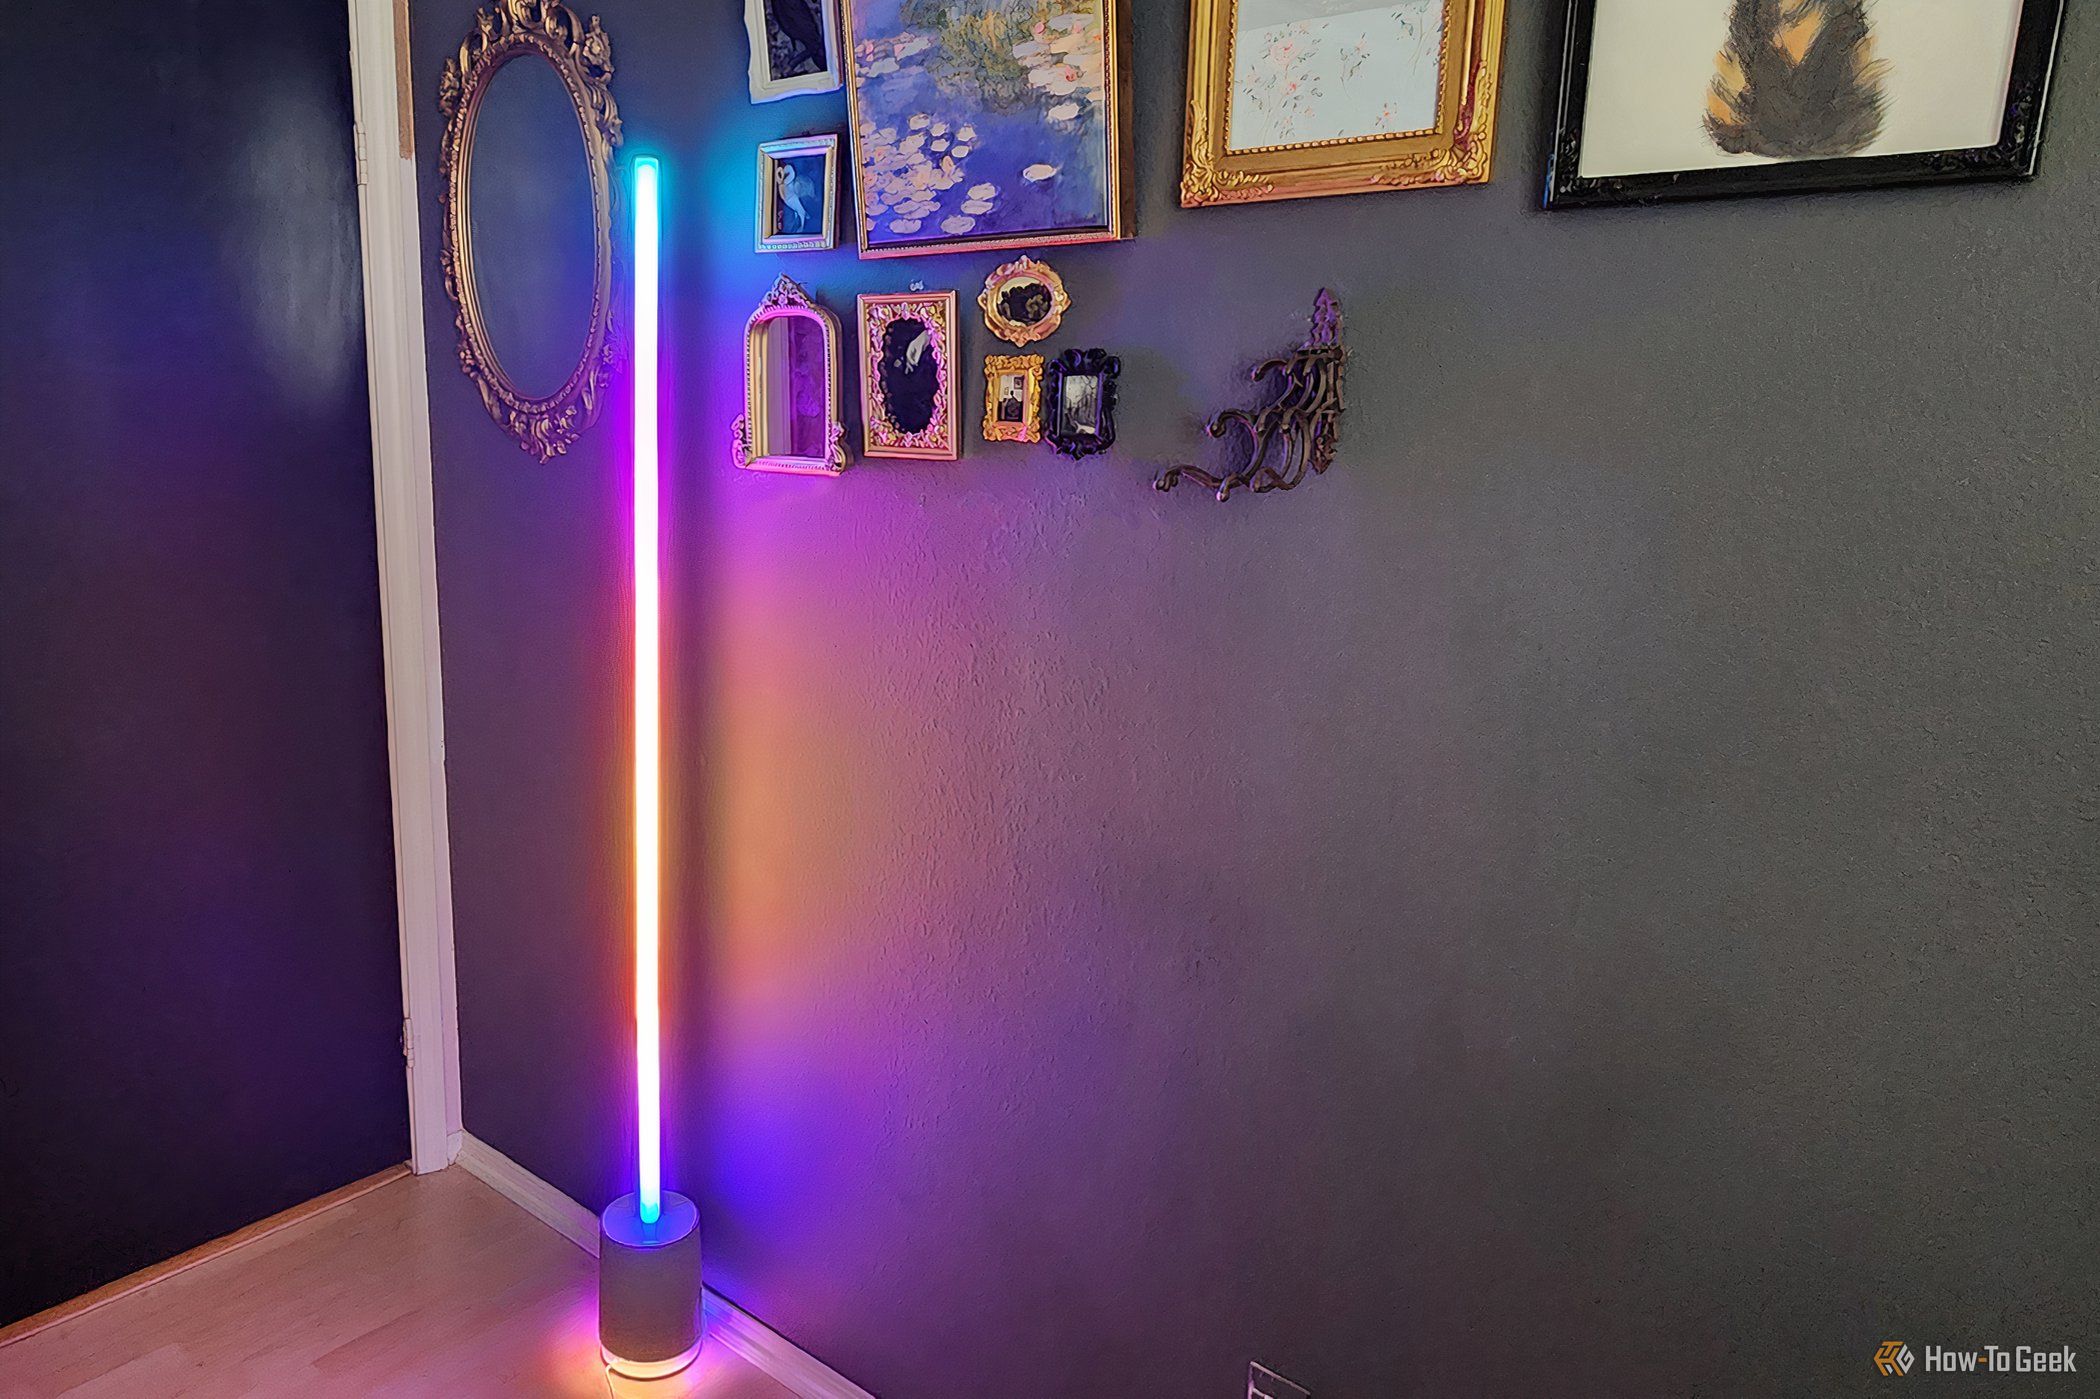 The Govee Floor Lamp Pro set to a multicolor scene setting.